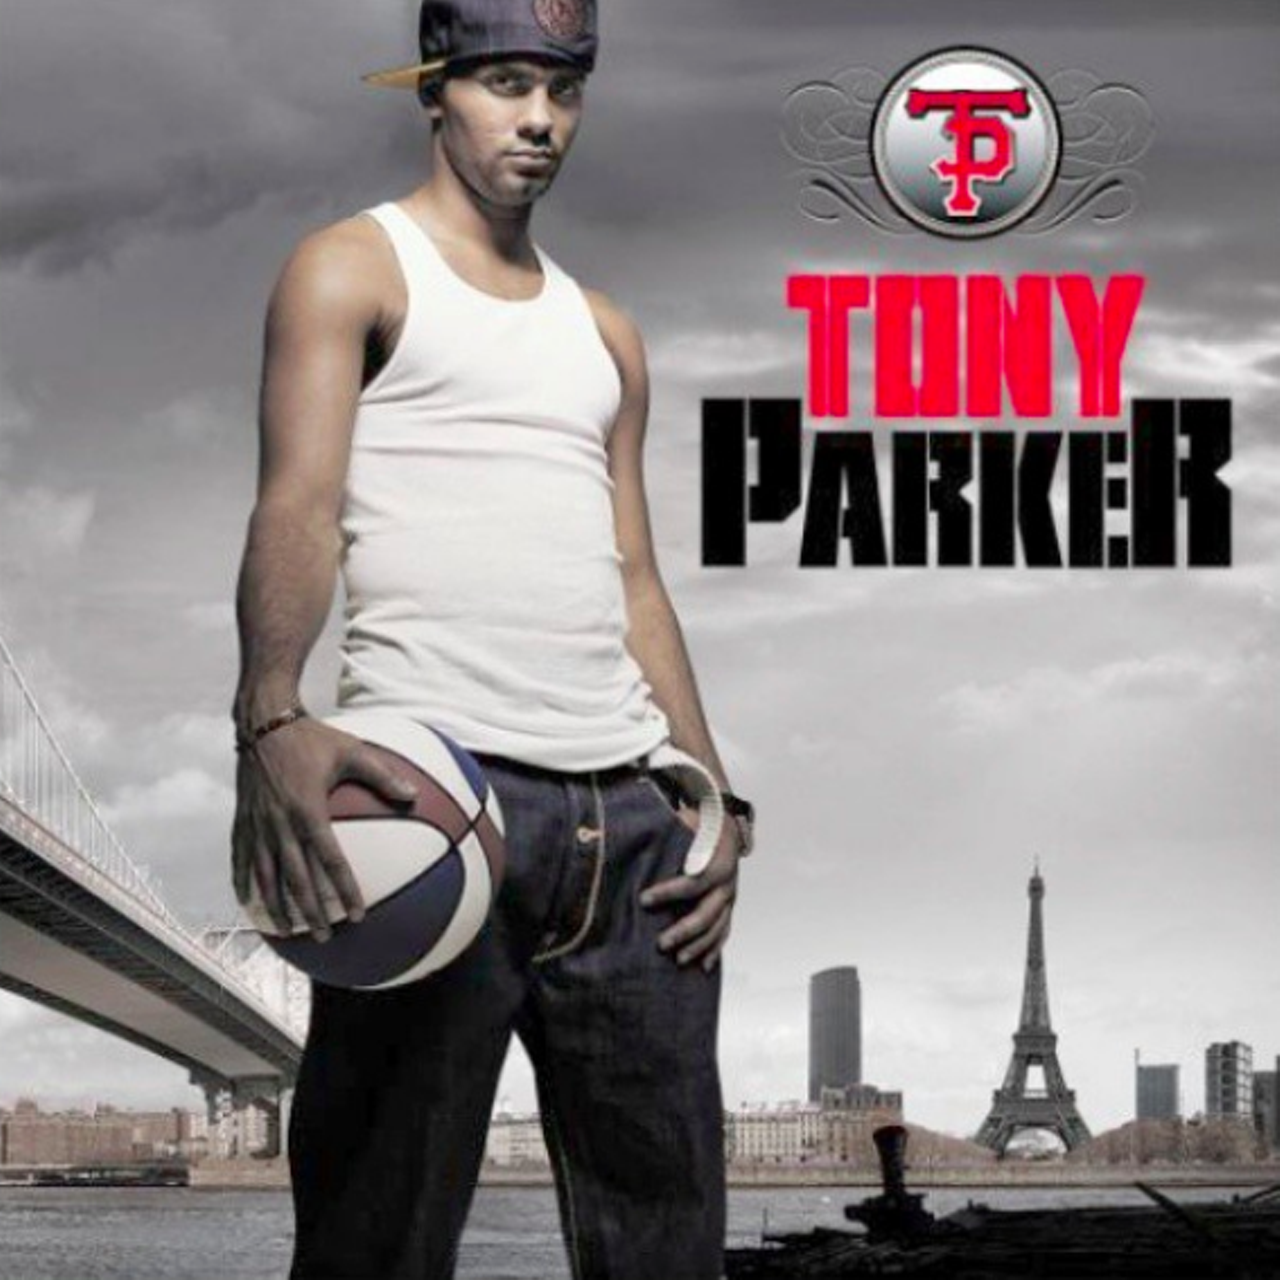 He put out an entire rap album.
In March 2007, just months before the Spurs won a championship, Parker released a rap album cleverly named TP. The songs range from club anthems that seem tailored for European discos to introspective ballads where Parker reflects on his life choices. We respect it.
Photo via Instagram / 210_spursnation